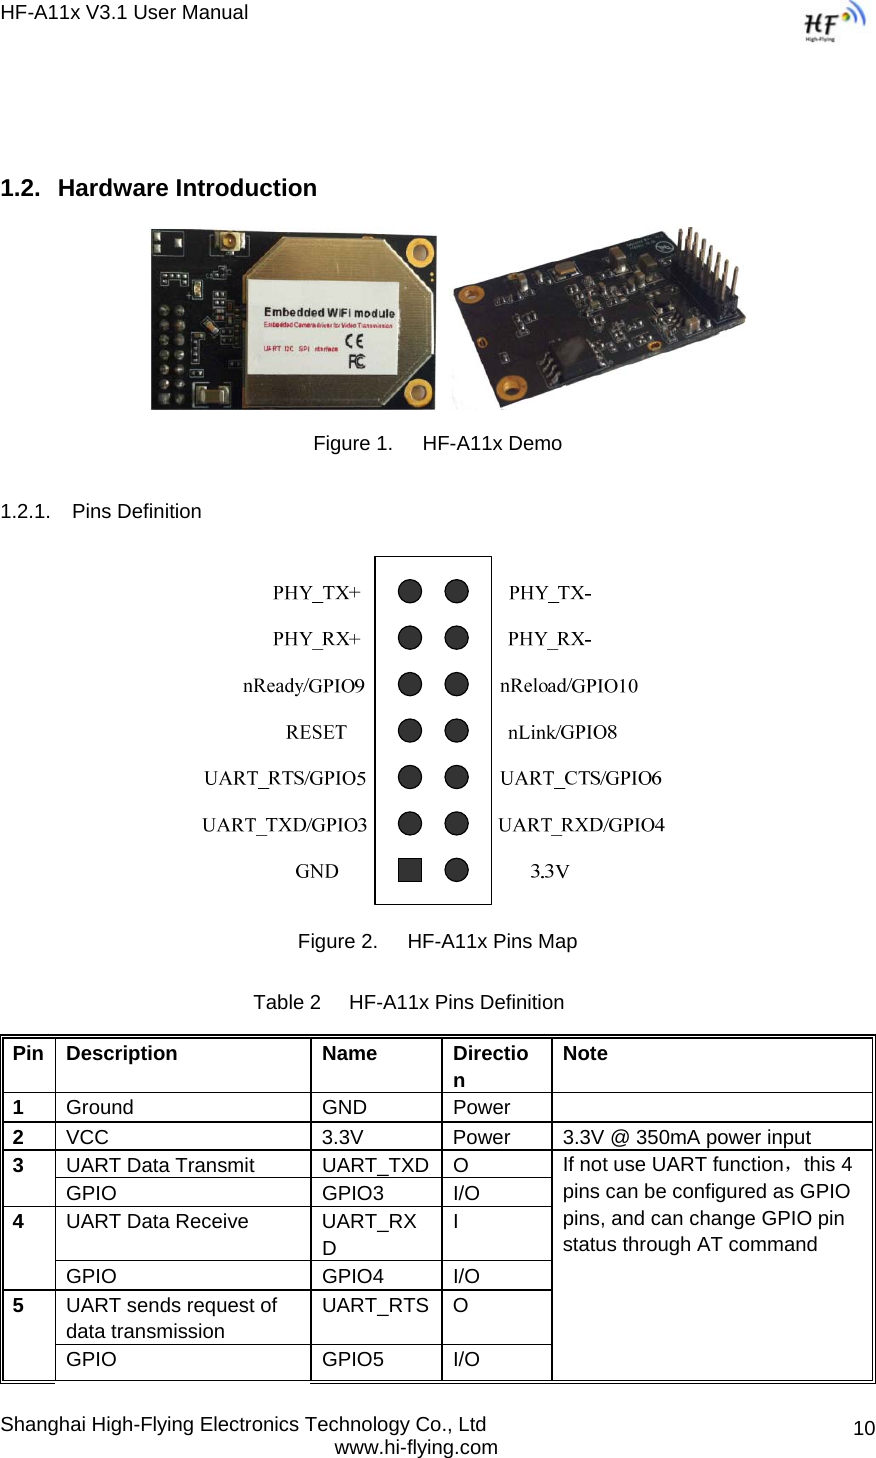 HF-A11x V3.1 User Manual Shanghai High-Flying Electronics Technology Co., Ltd www.hi-flying.com  10  1.2. Hardware Introduction      Figure 1.  HF-A11x Demo  1.2.1. Pins Definition  Figure 2.  HF-A11x Pins Map Table 2     HF-A11x Pins Definition Pin Description  Name  Direction  Note 1   Ground GND Power  2  VCC  3.3V   Power  3.3V @ 350mA power input UART Data Transmit  UART_TXD O 3 GPIO GPIO3 I/O UART Data Receive  UART_RXD I 4 GPIO GPIO4 I/O UART sends request of data transmission  UART_RTS O 5 GPIO GPIO5 I/O If not use UART function，this 4 pins can be configured as GPIO pins, and can change GPIO pin status through AT command 